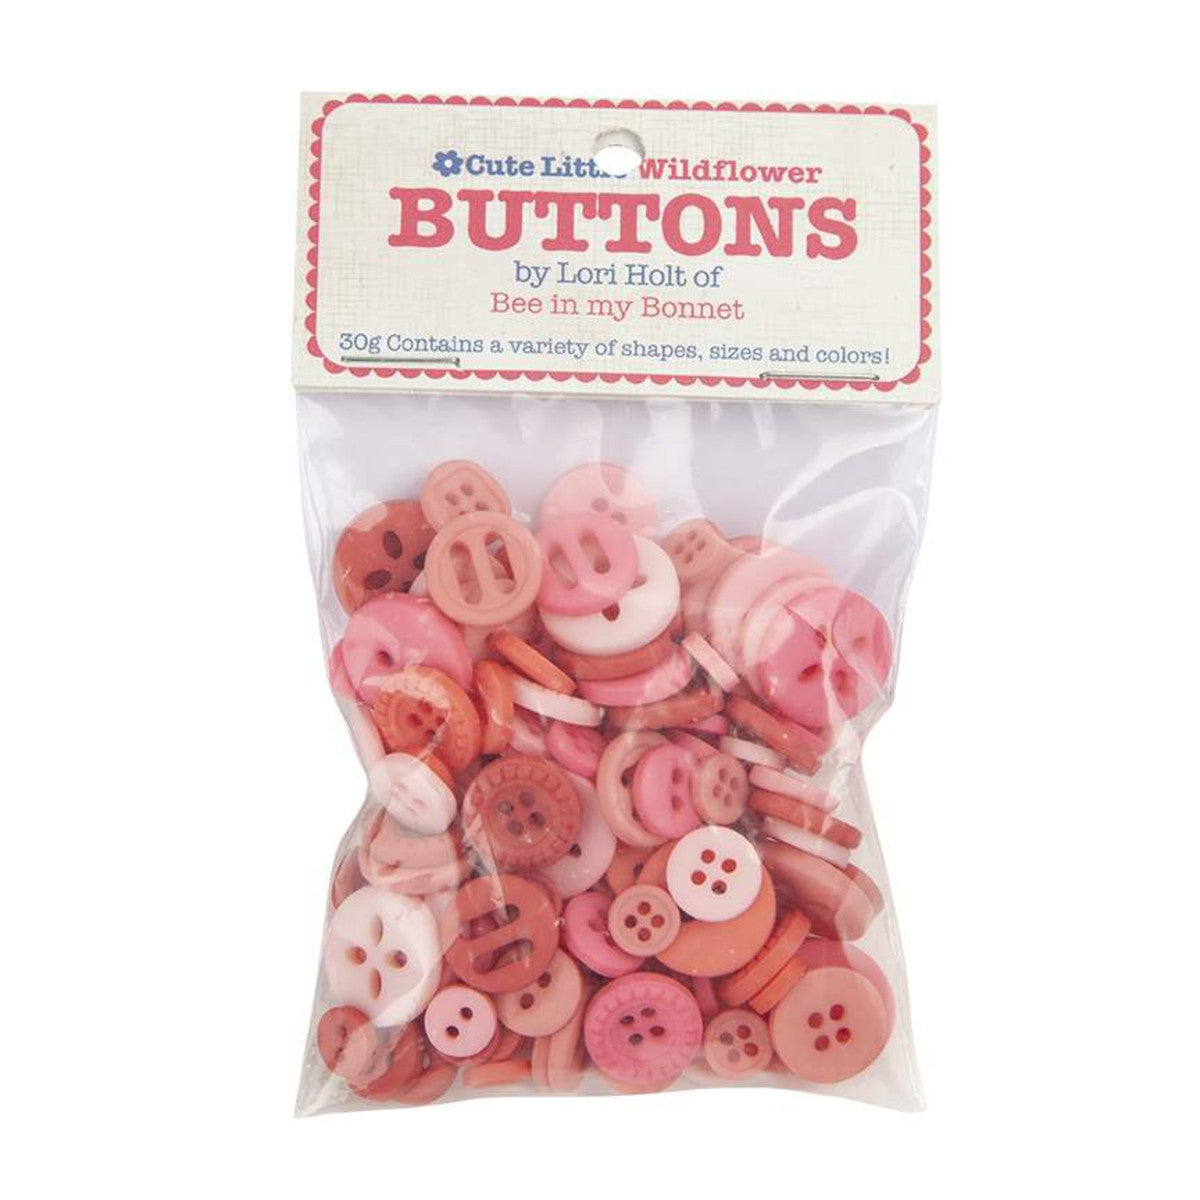 Buttons, Wildflower Cute Little Button Packet by Lori Holt